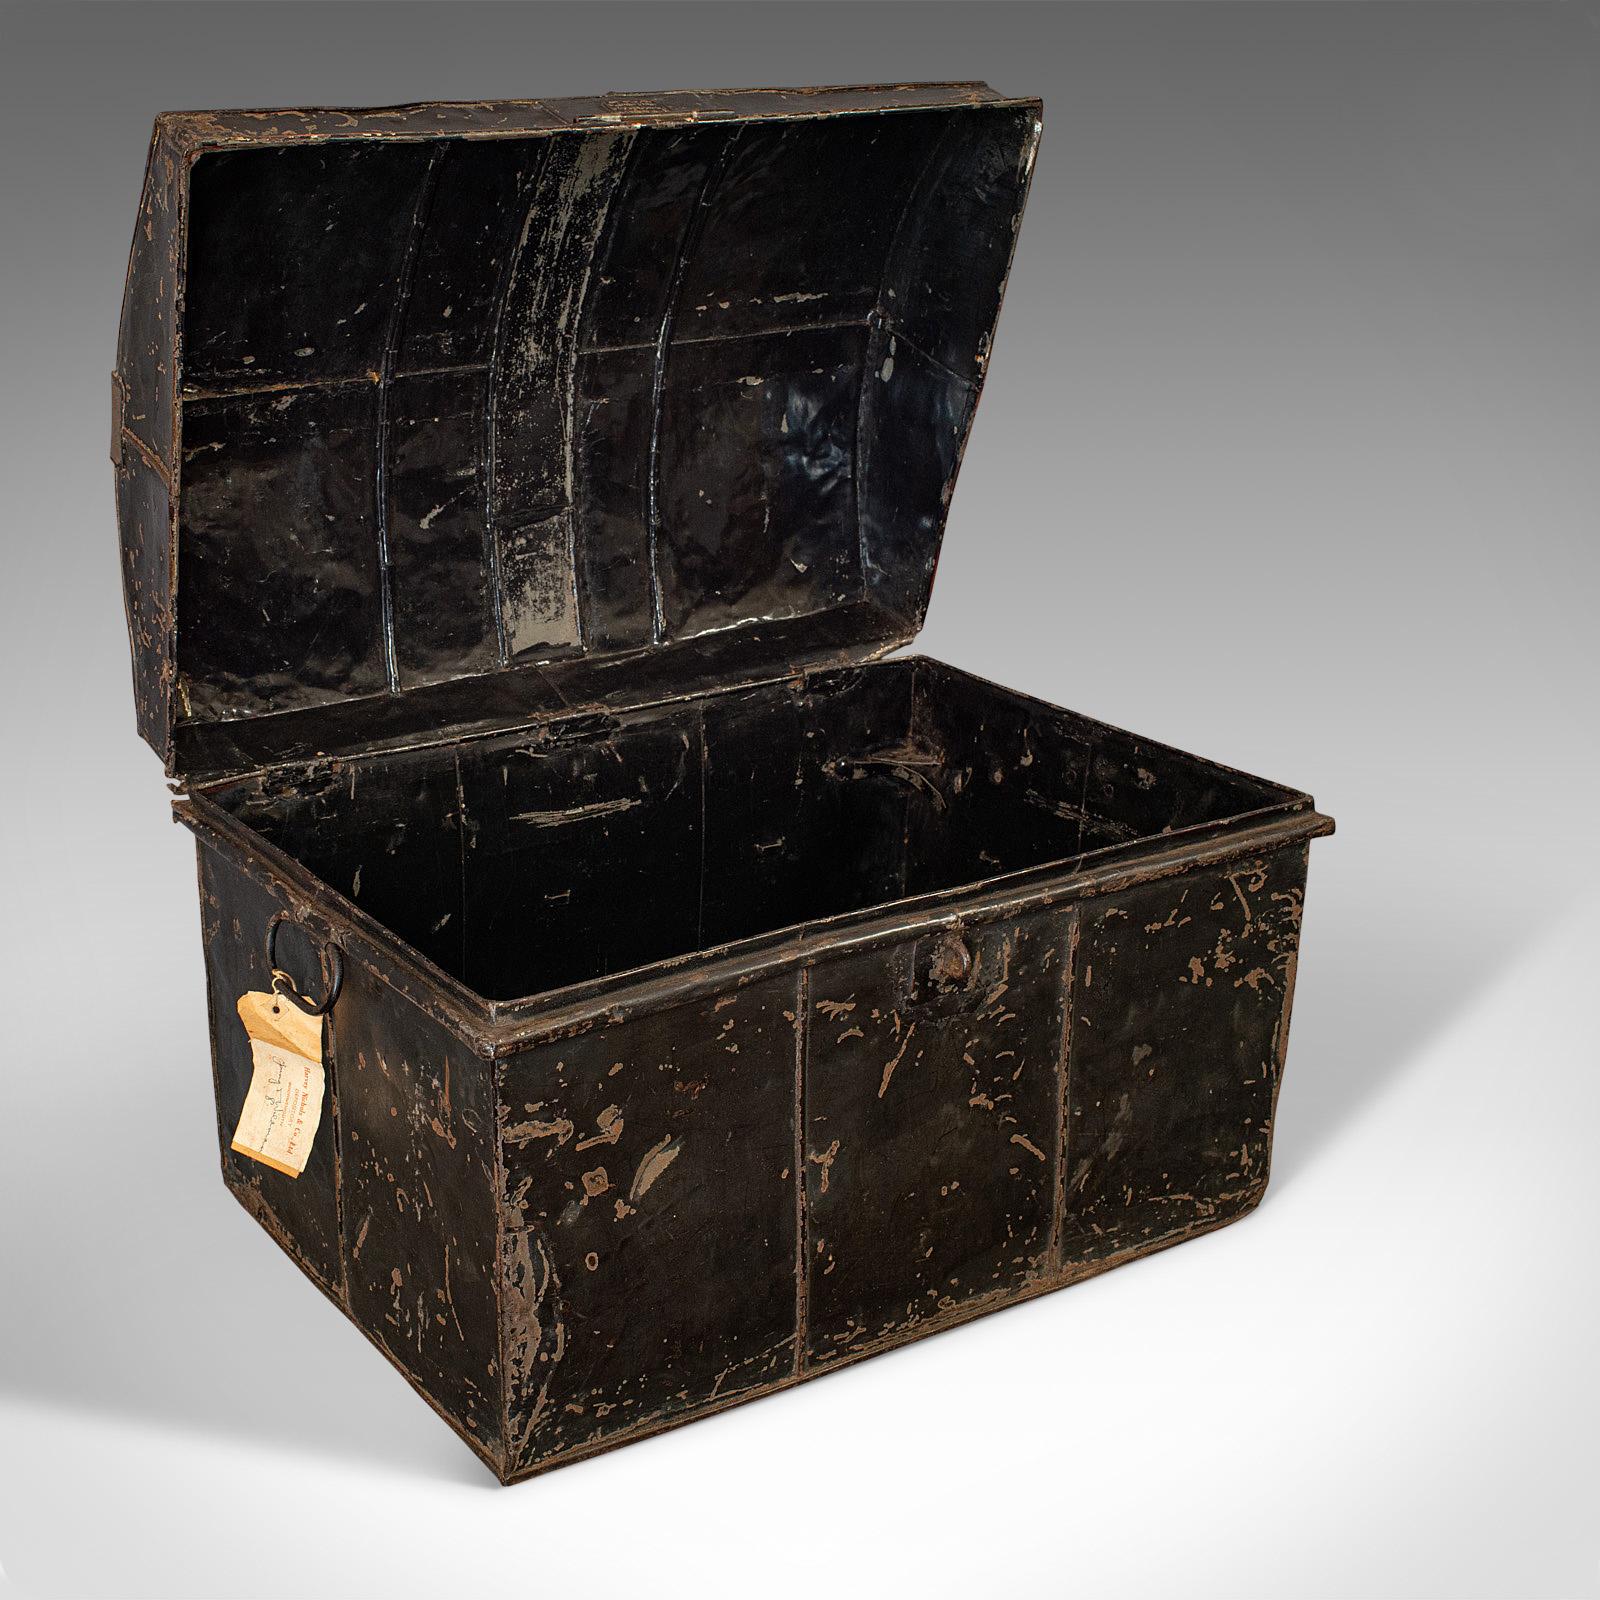 This is an antique travel trunk. An English, tin shipping chest in the name of T.B. Wildman, vice consulate for Great Britain in Punta Arenas, Chile and dating to the early 20th century, circa 1919.

Of historical interest and appeal
Displays a